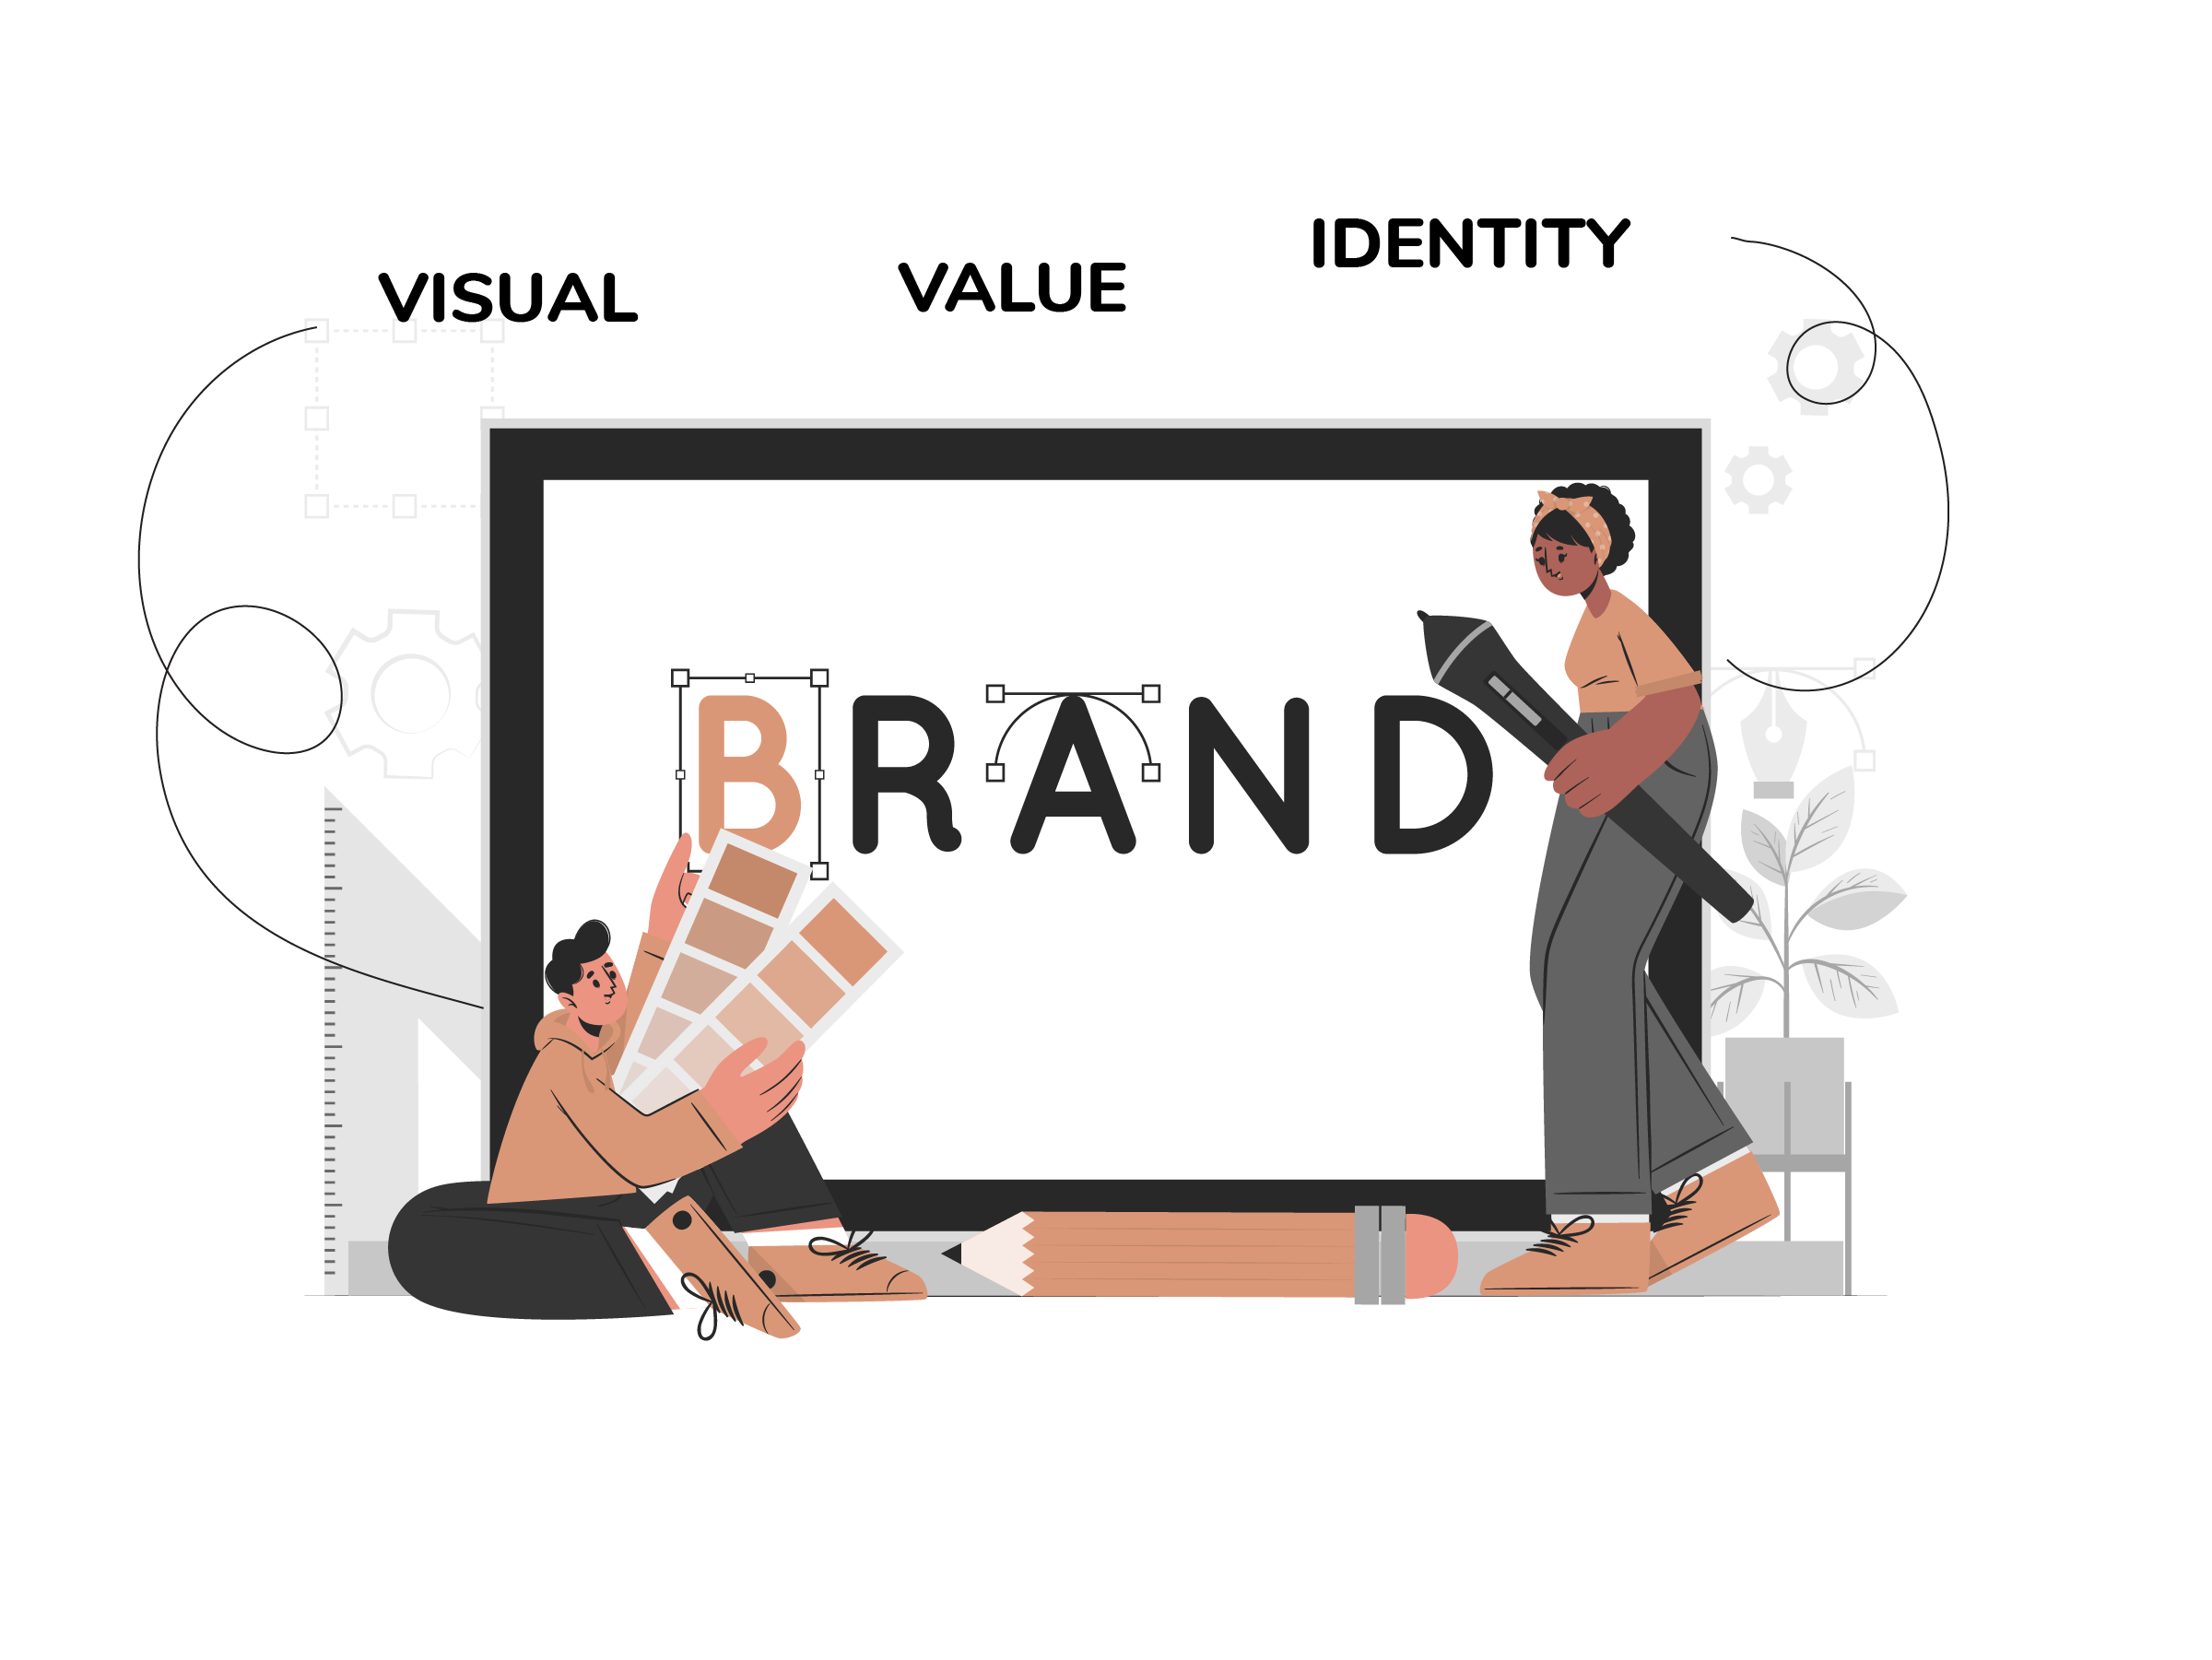 Two individuals are interacting with a large frame that prominently displays the word “BRAND.” One person is seated on the ground, selecting colors from swatches for the letters, while the other stands with a clipboard, possibly evaluating the choices. Surrounding the frame are the words “VISUAL,” “VALUE,” and “IDENTITY,” signifying key aspects of branding.